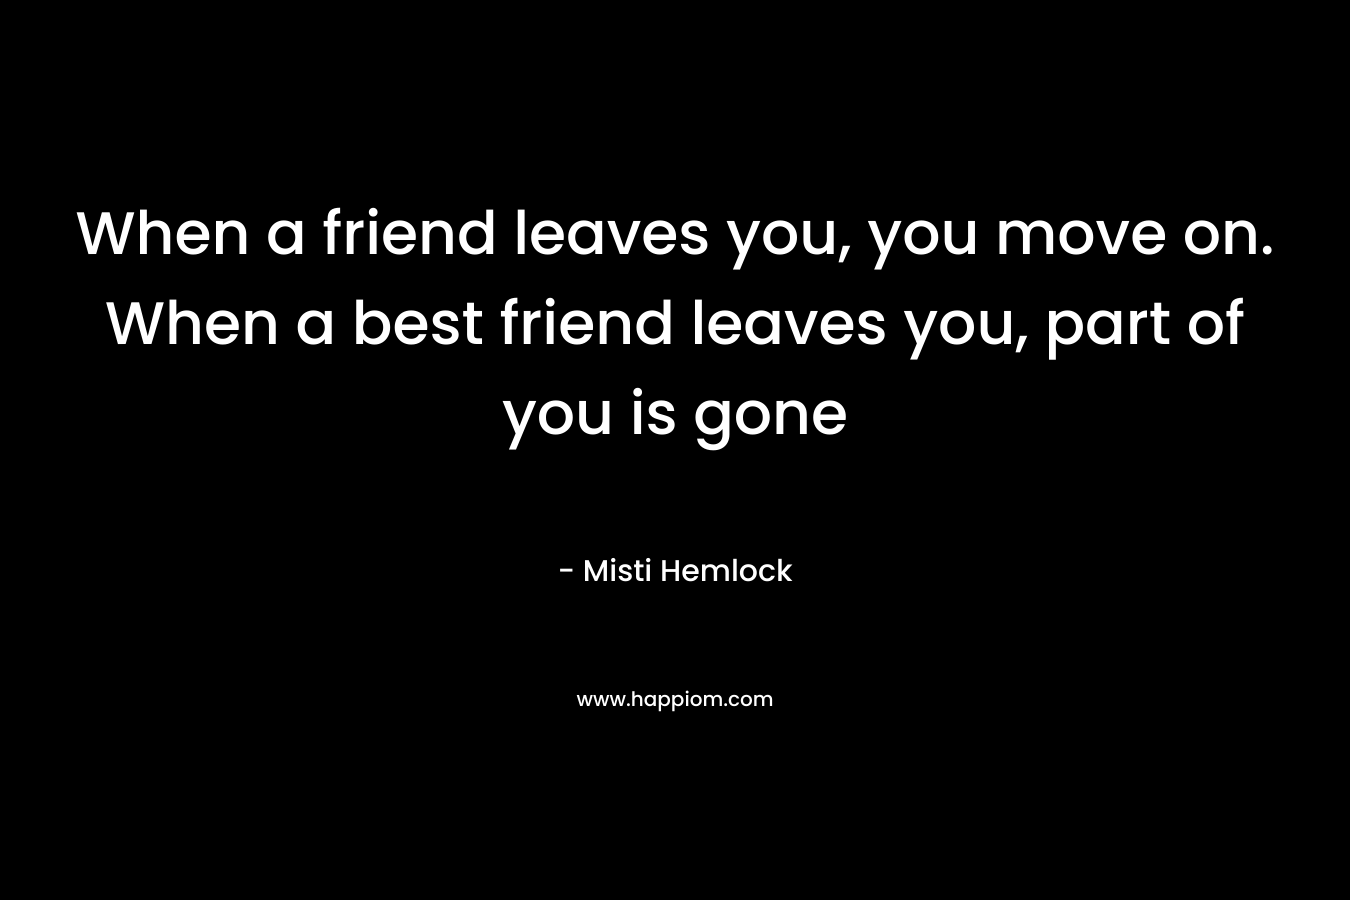 When a friend leaves you, you move on. When a best friend leaves you, part of you is gone – Misti Hemlock